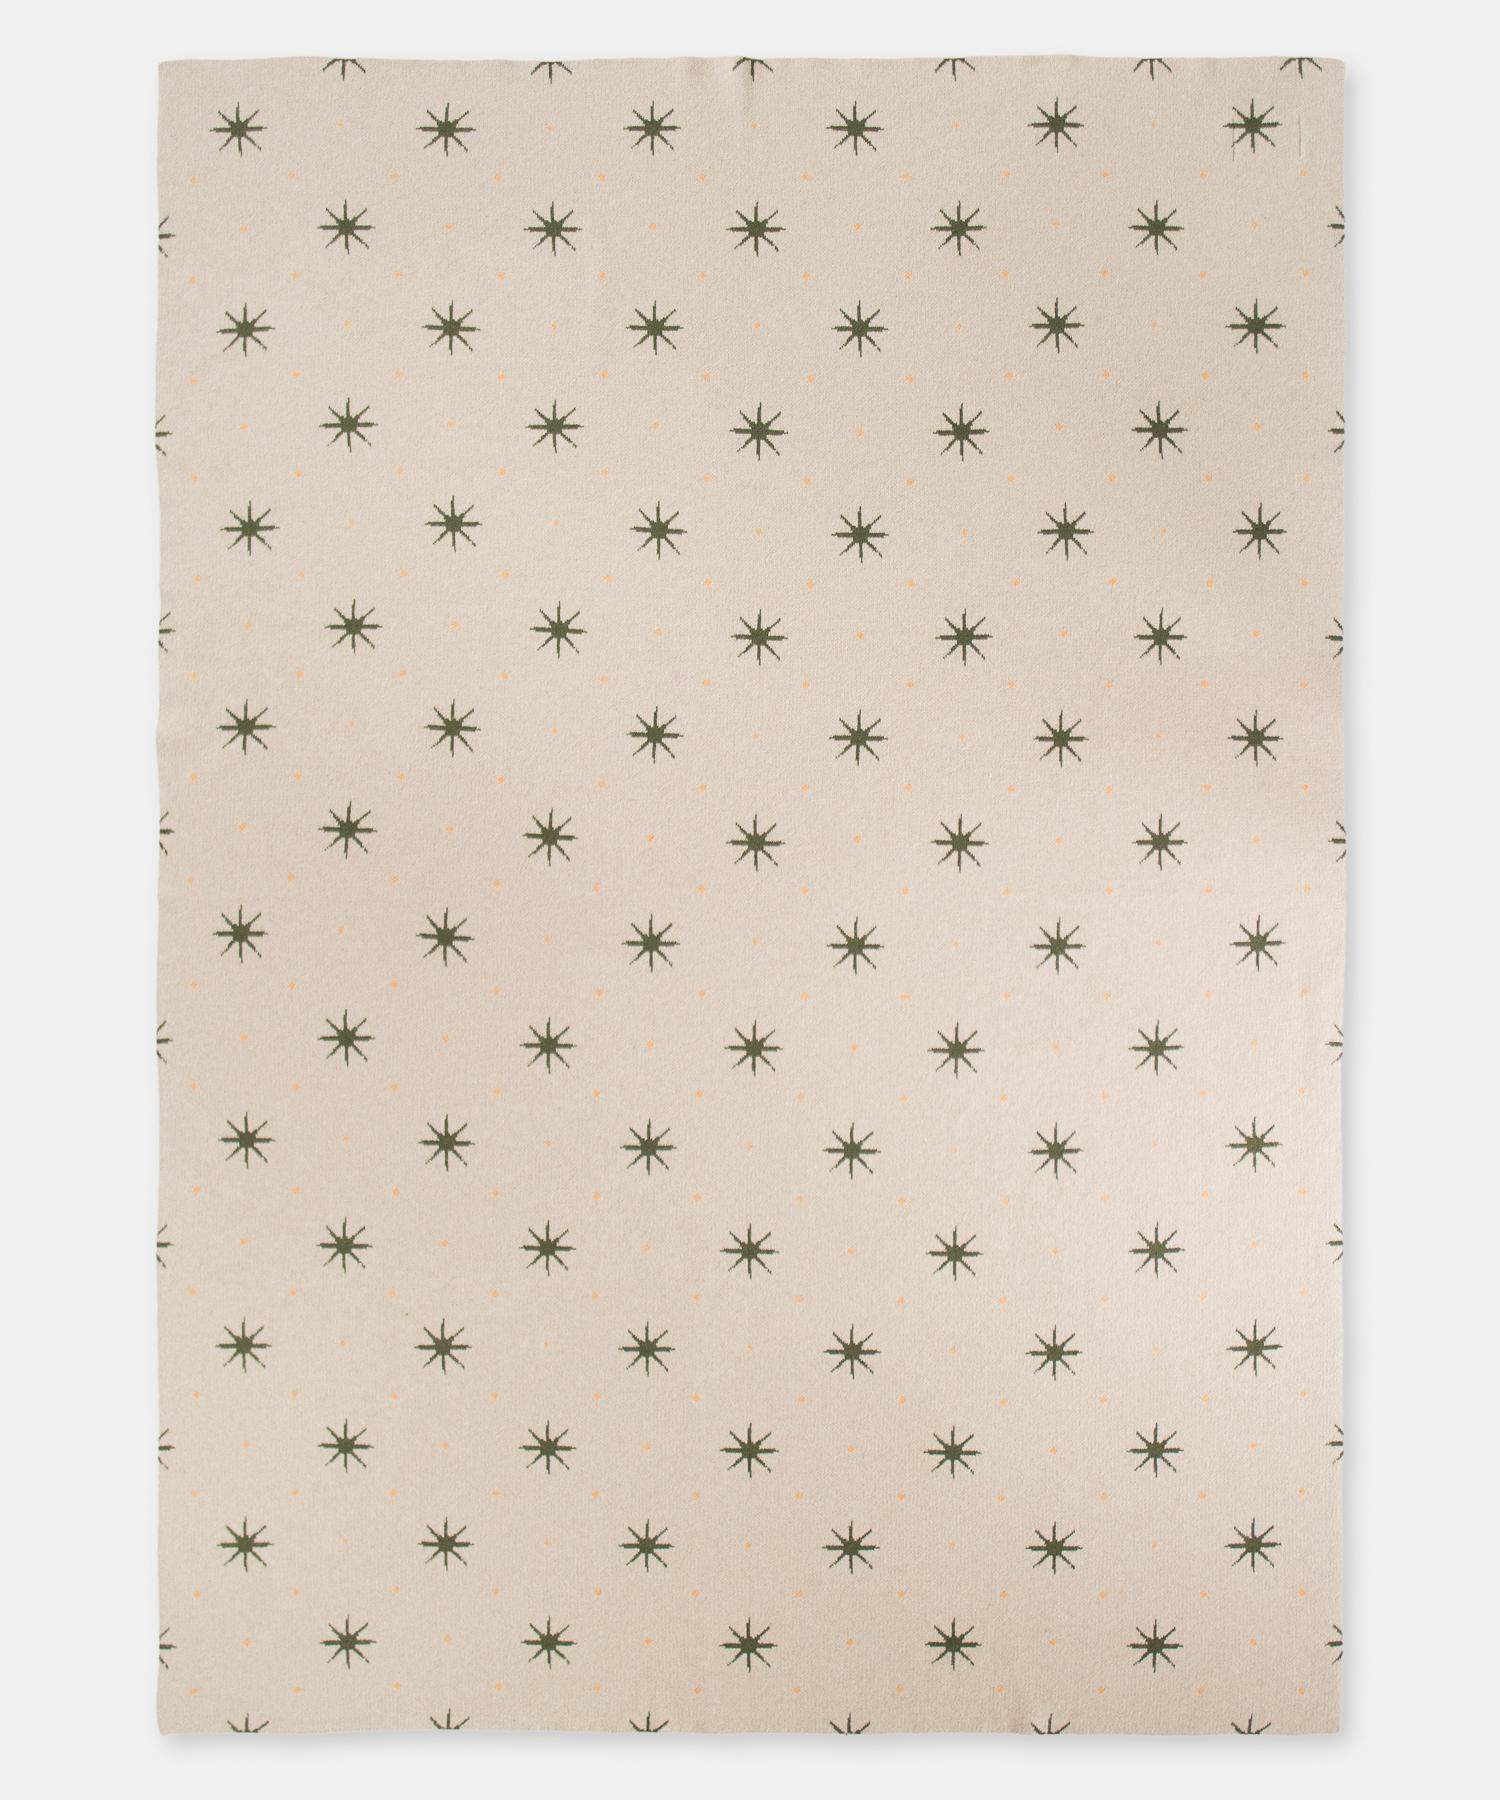 Mongolian Green Stars Cashmere Throw by Saved, New York